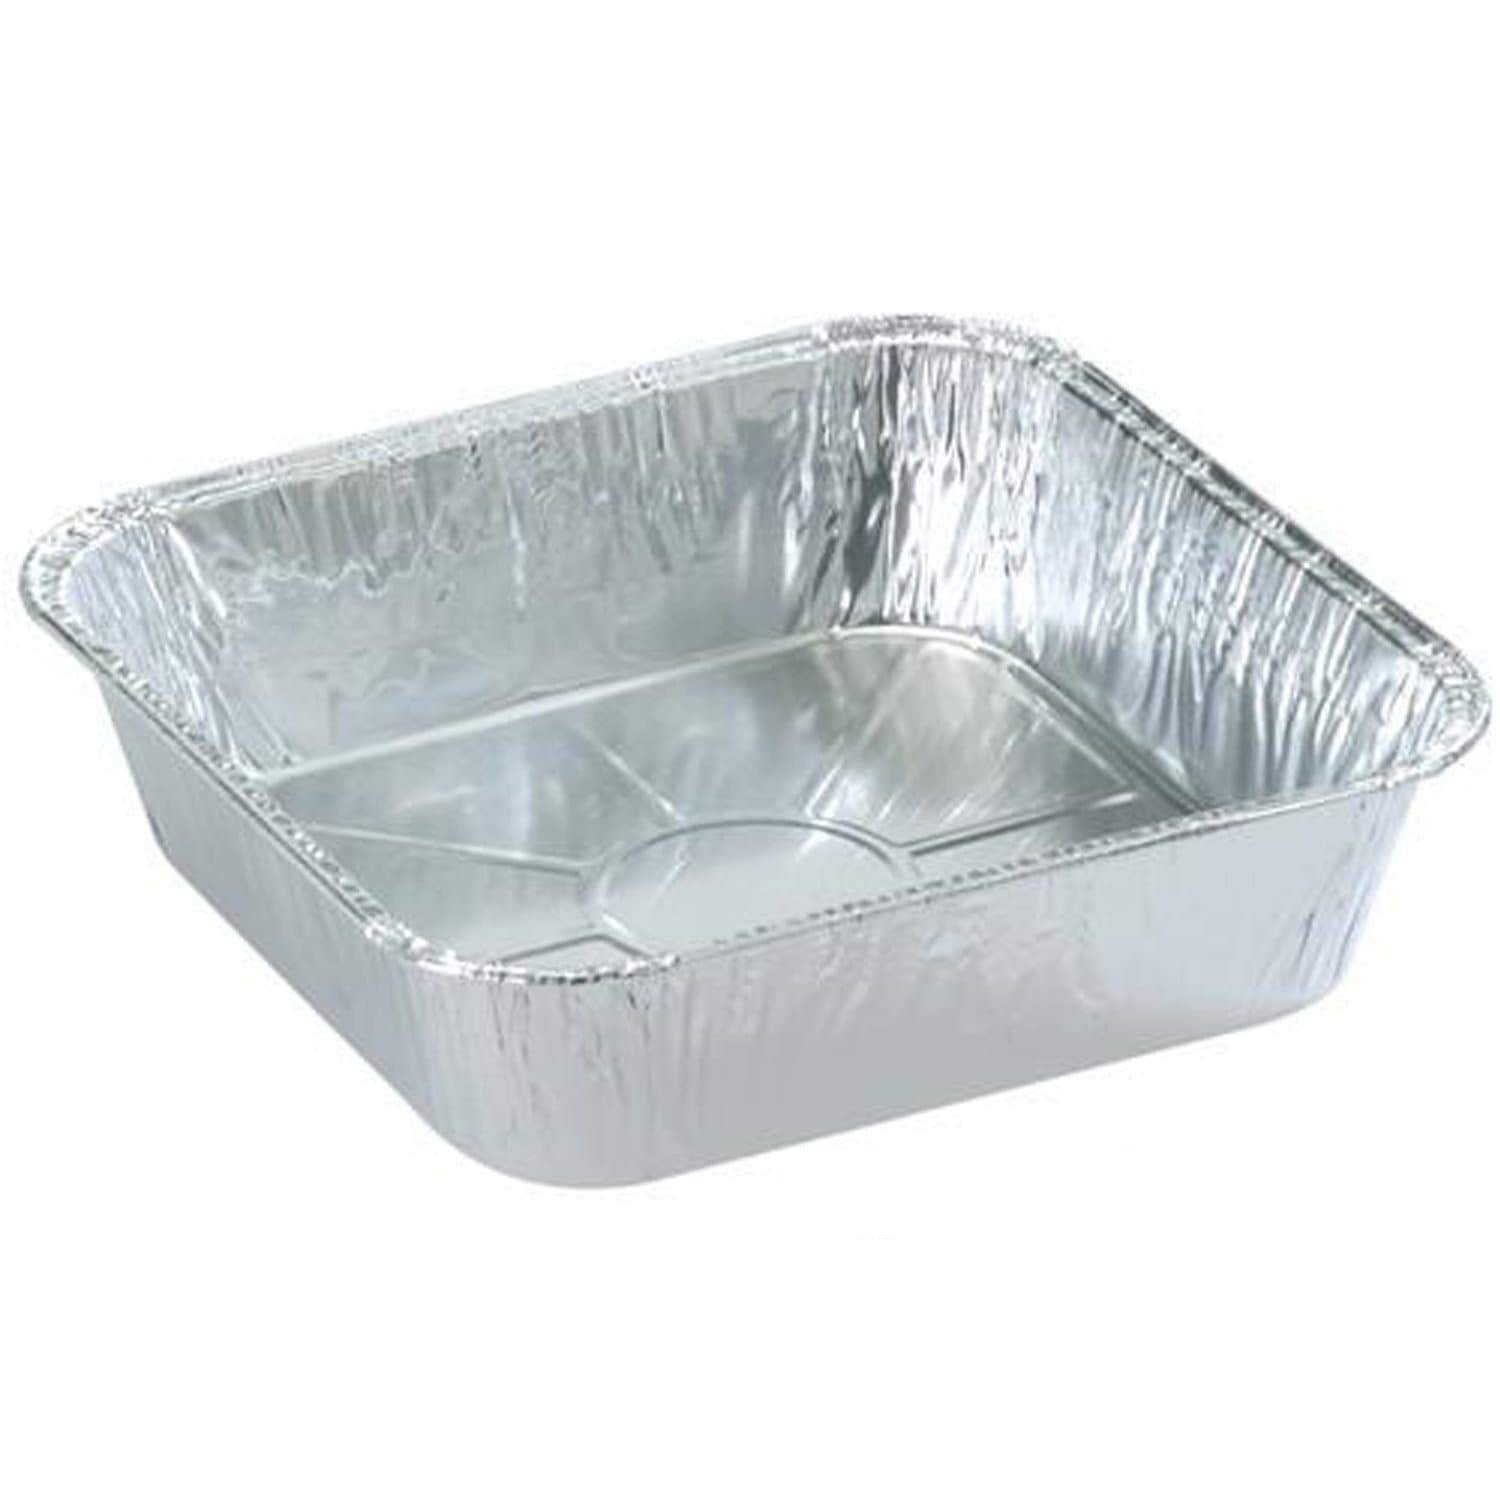 Nicole Home Collection 00623 9 in. Deep Square Cake Pan - 500 per Case